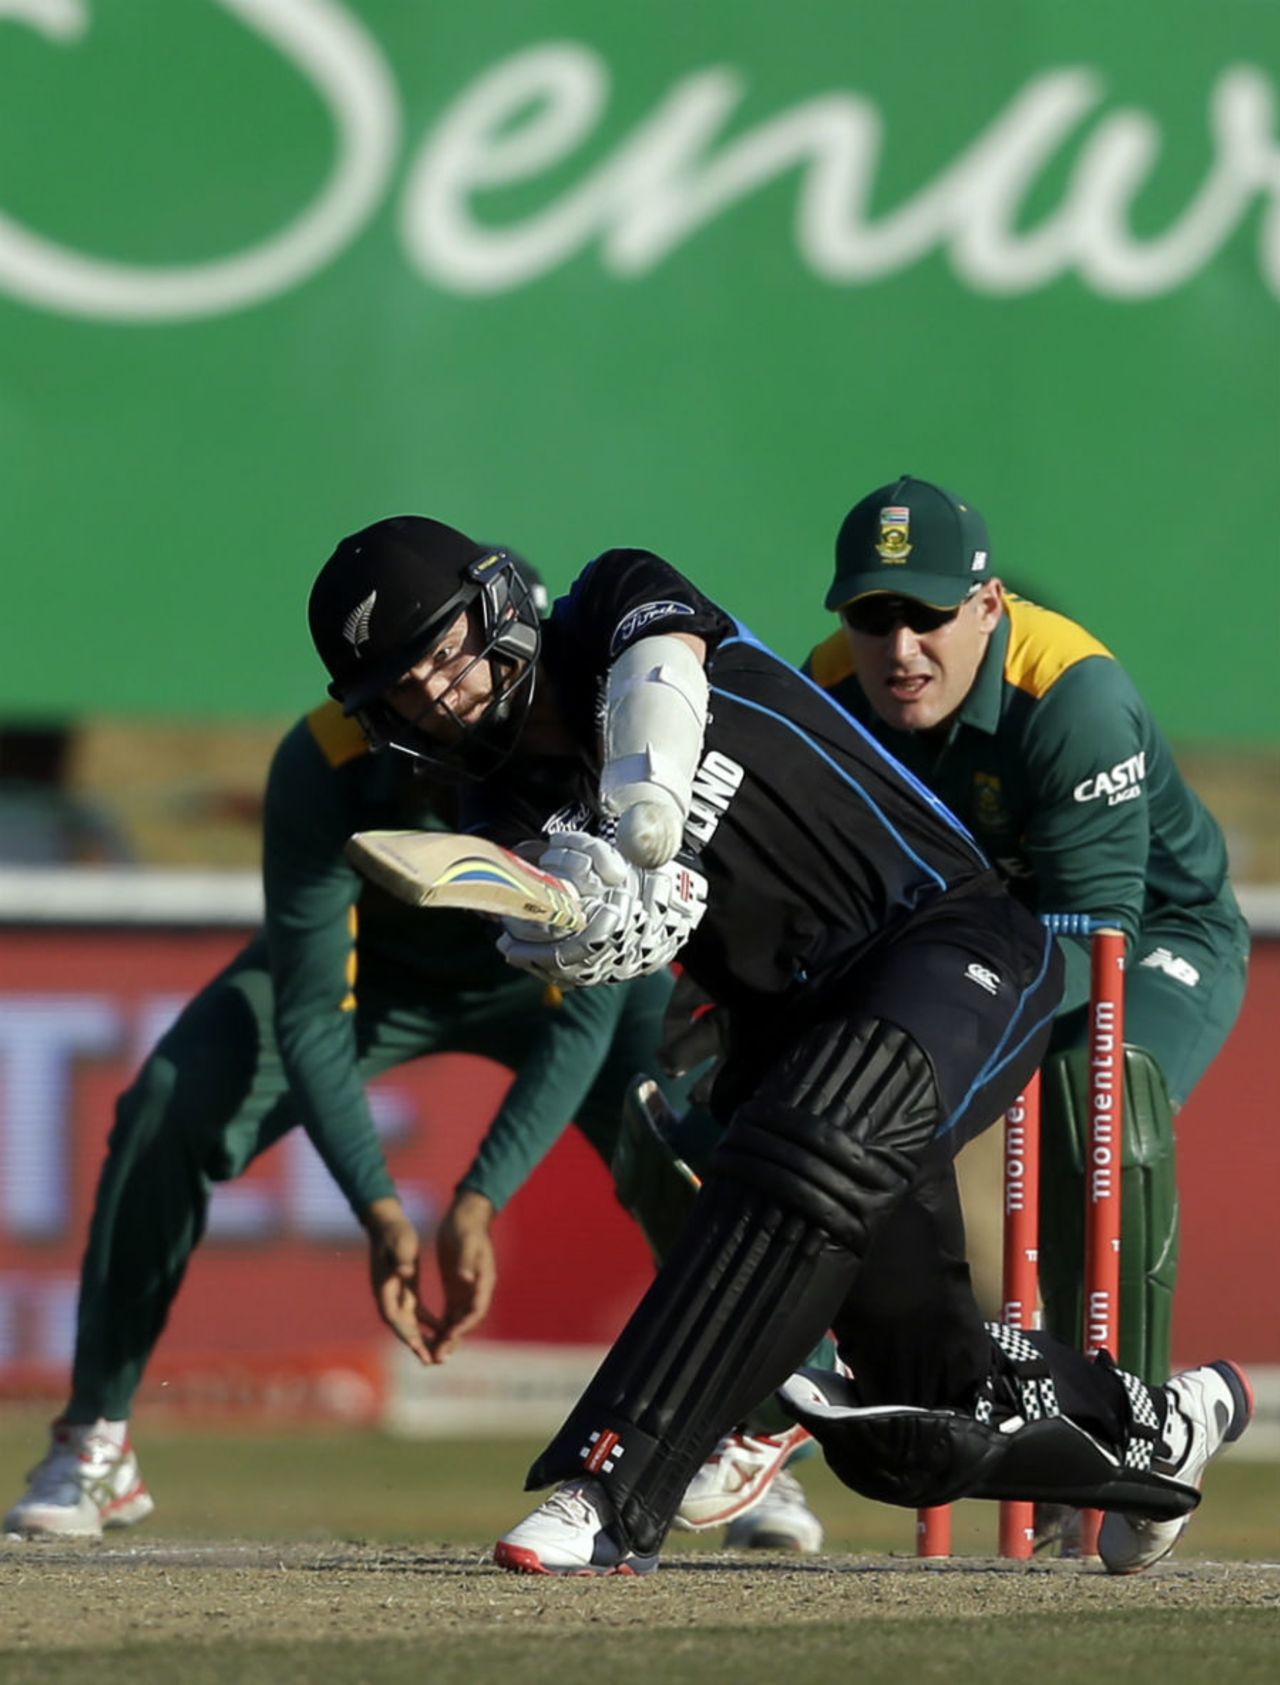 Kane Williamson was dismissed for his first single-digit score since the 2015 World Cup, South Africa v New Zealand, 2nd ODI, Potchefstroom 